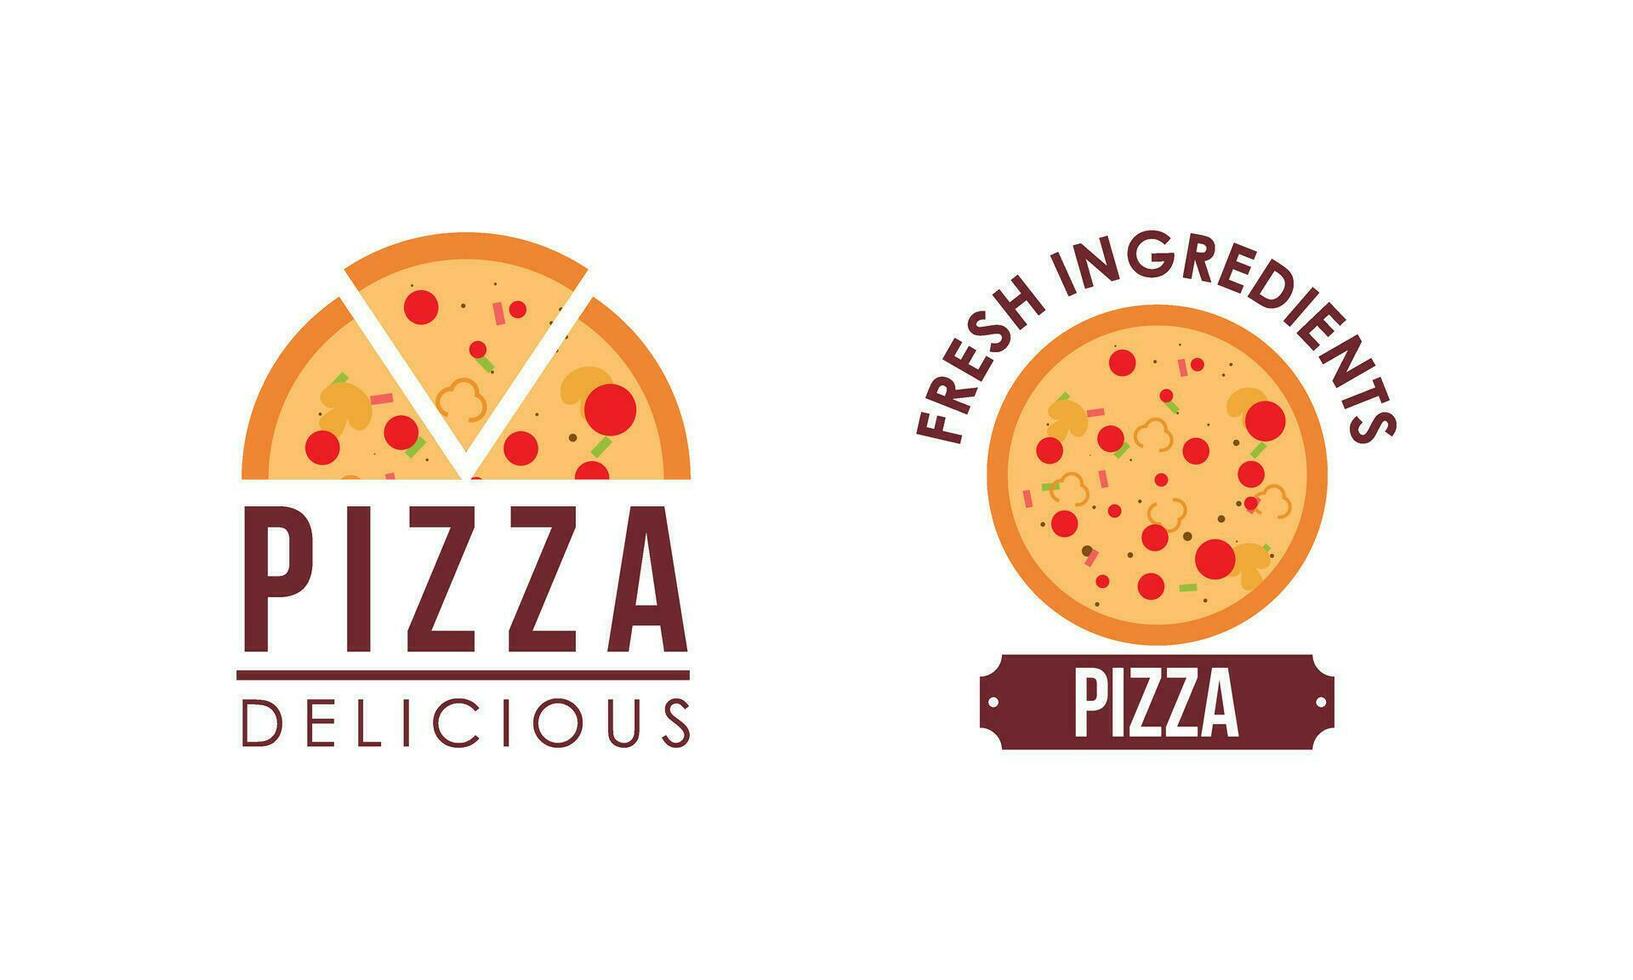 Pizza logo, icons and design elements for pizzeria vector